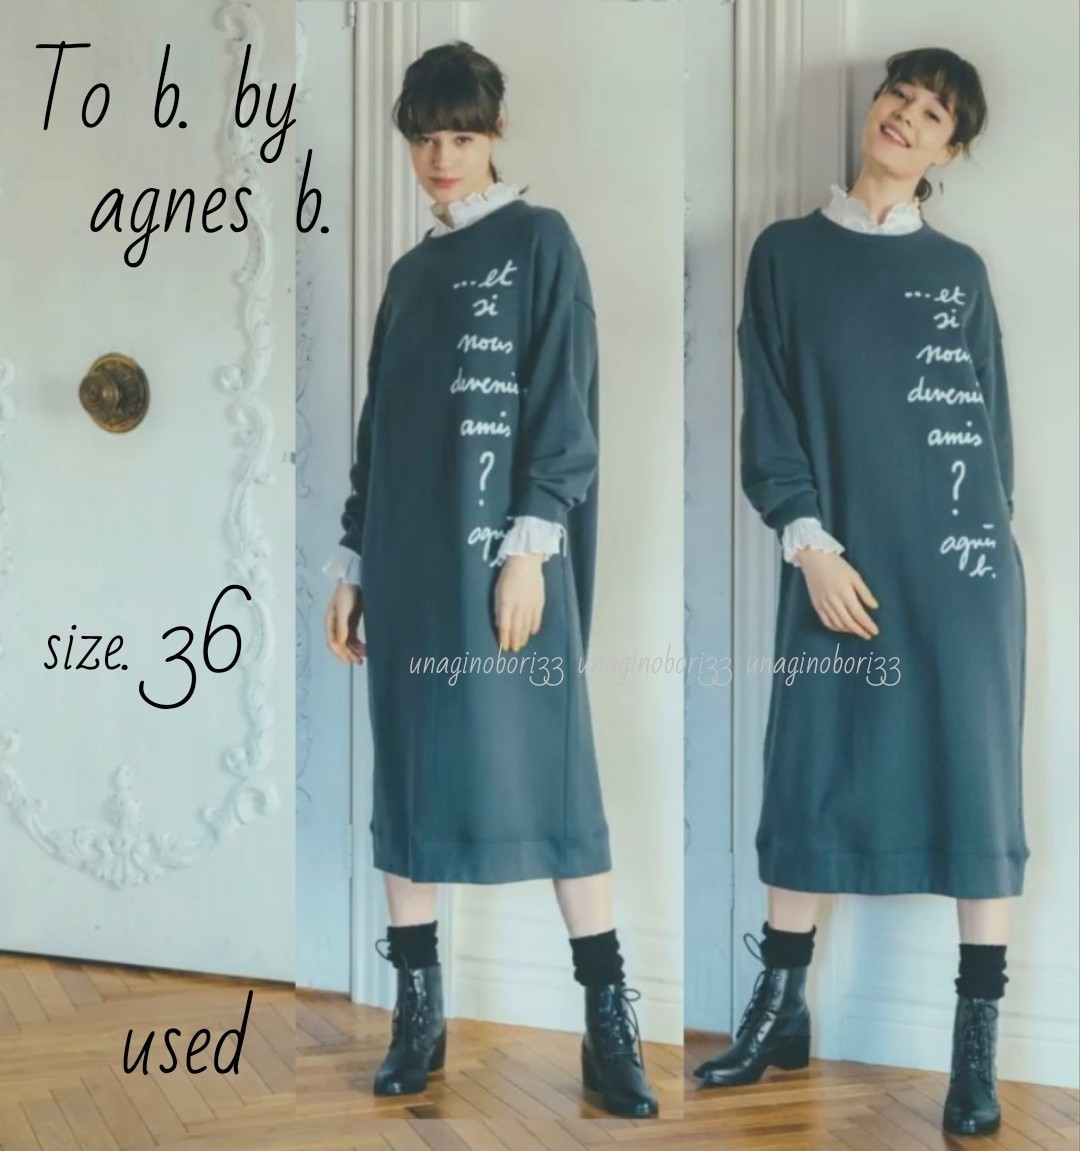 To b.by agnes b. message One-piece 36 toe Be bai Agnes B charcoal gray sweat long sleeve long height lady's beautiful goods Logo 